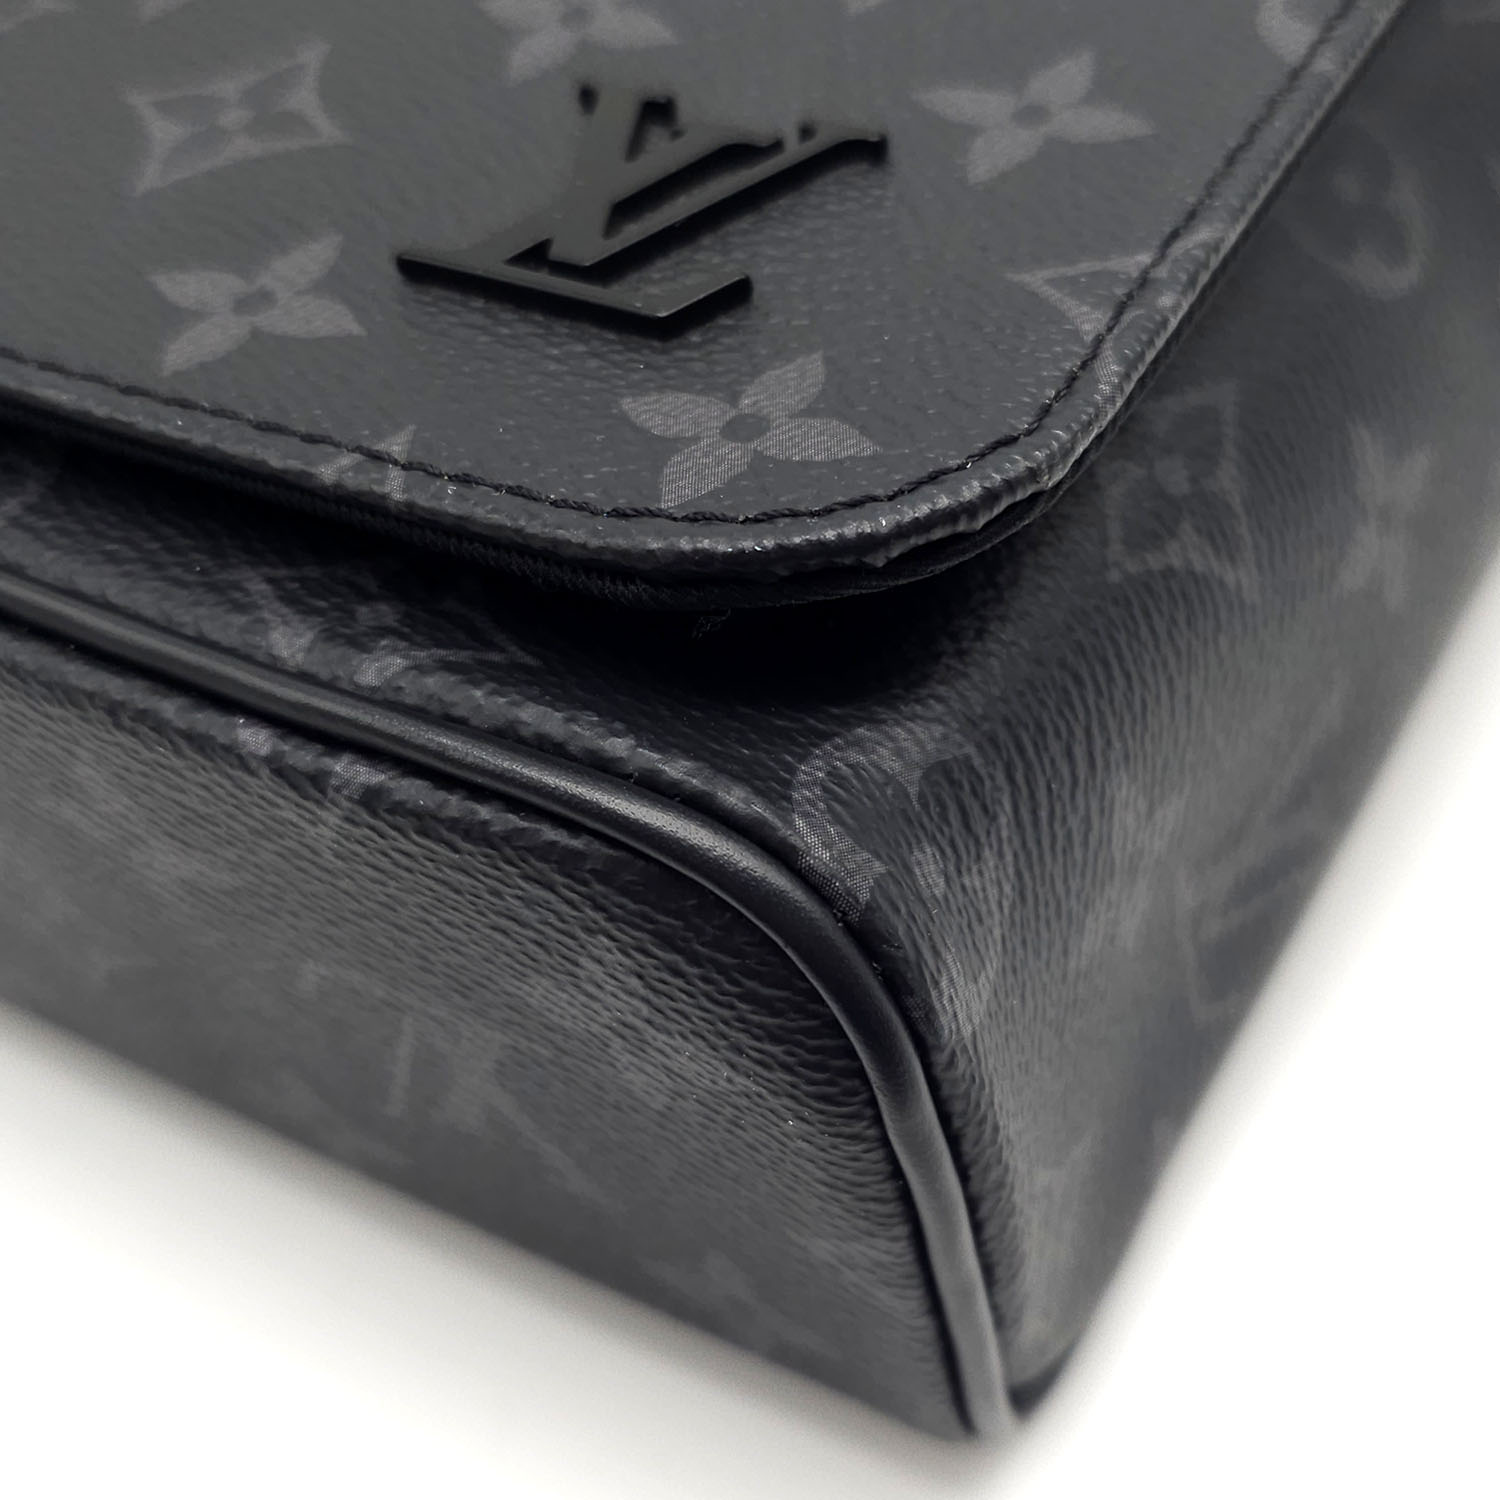 Patent leather wallet Louis Vuitton x Fragment Black in Patent